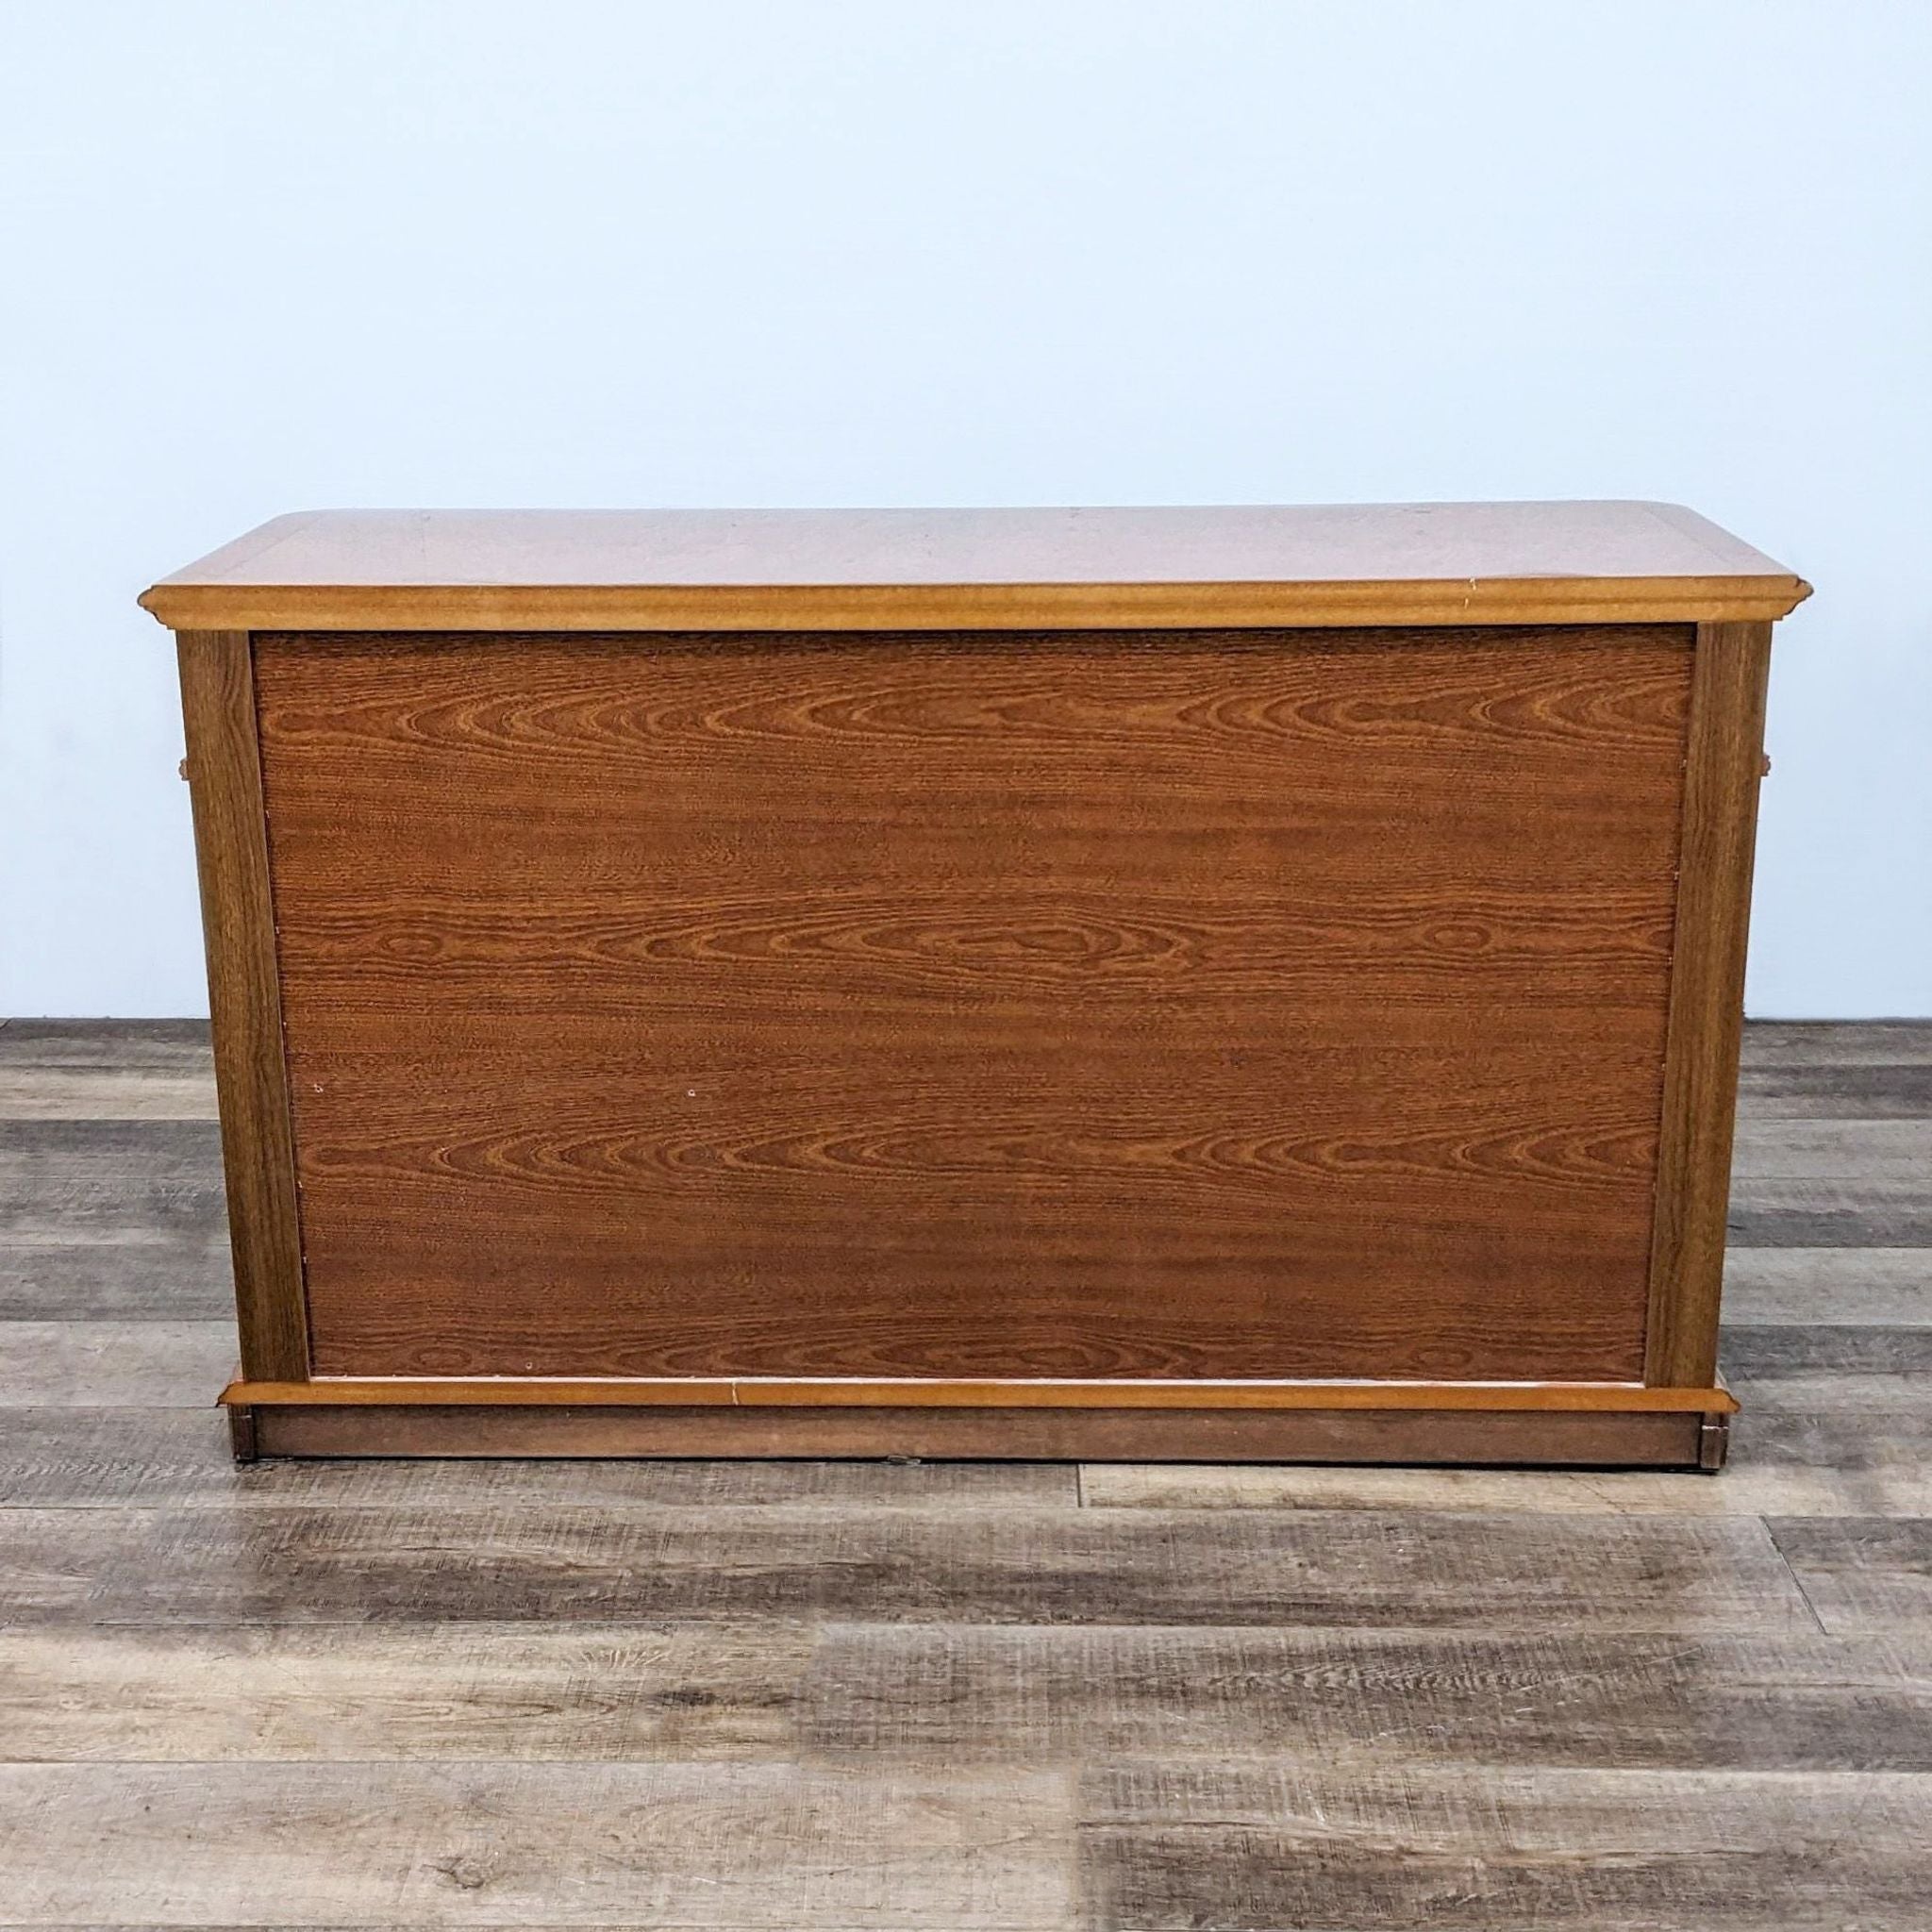 Reperch wood dresser with classic inlay detailing and eight drawers, set against a plain backdrop.